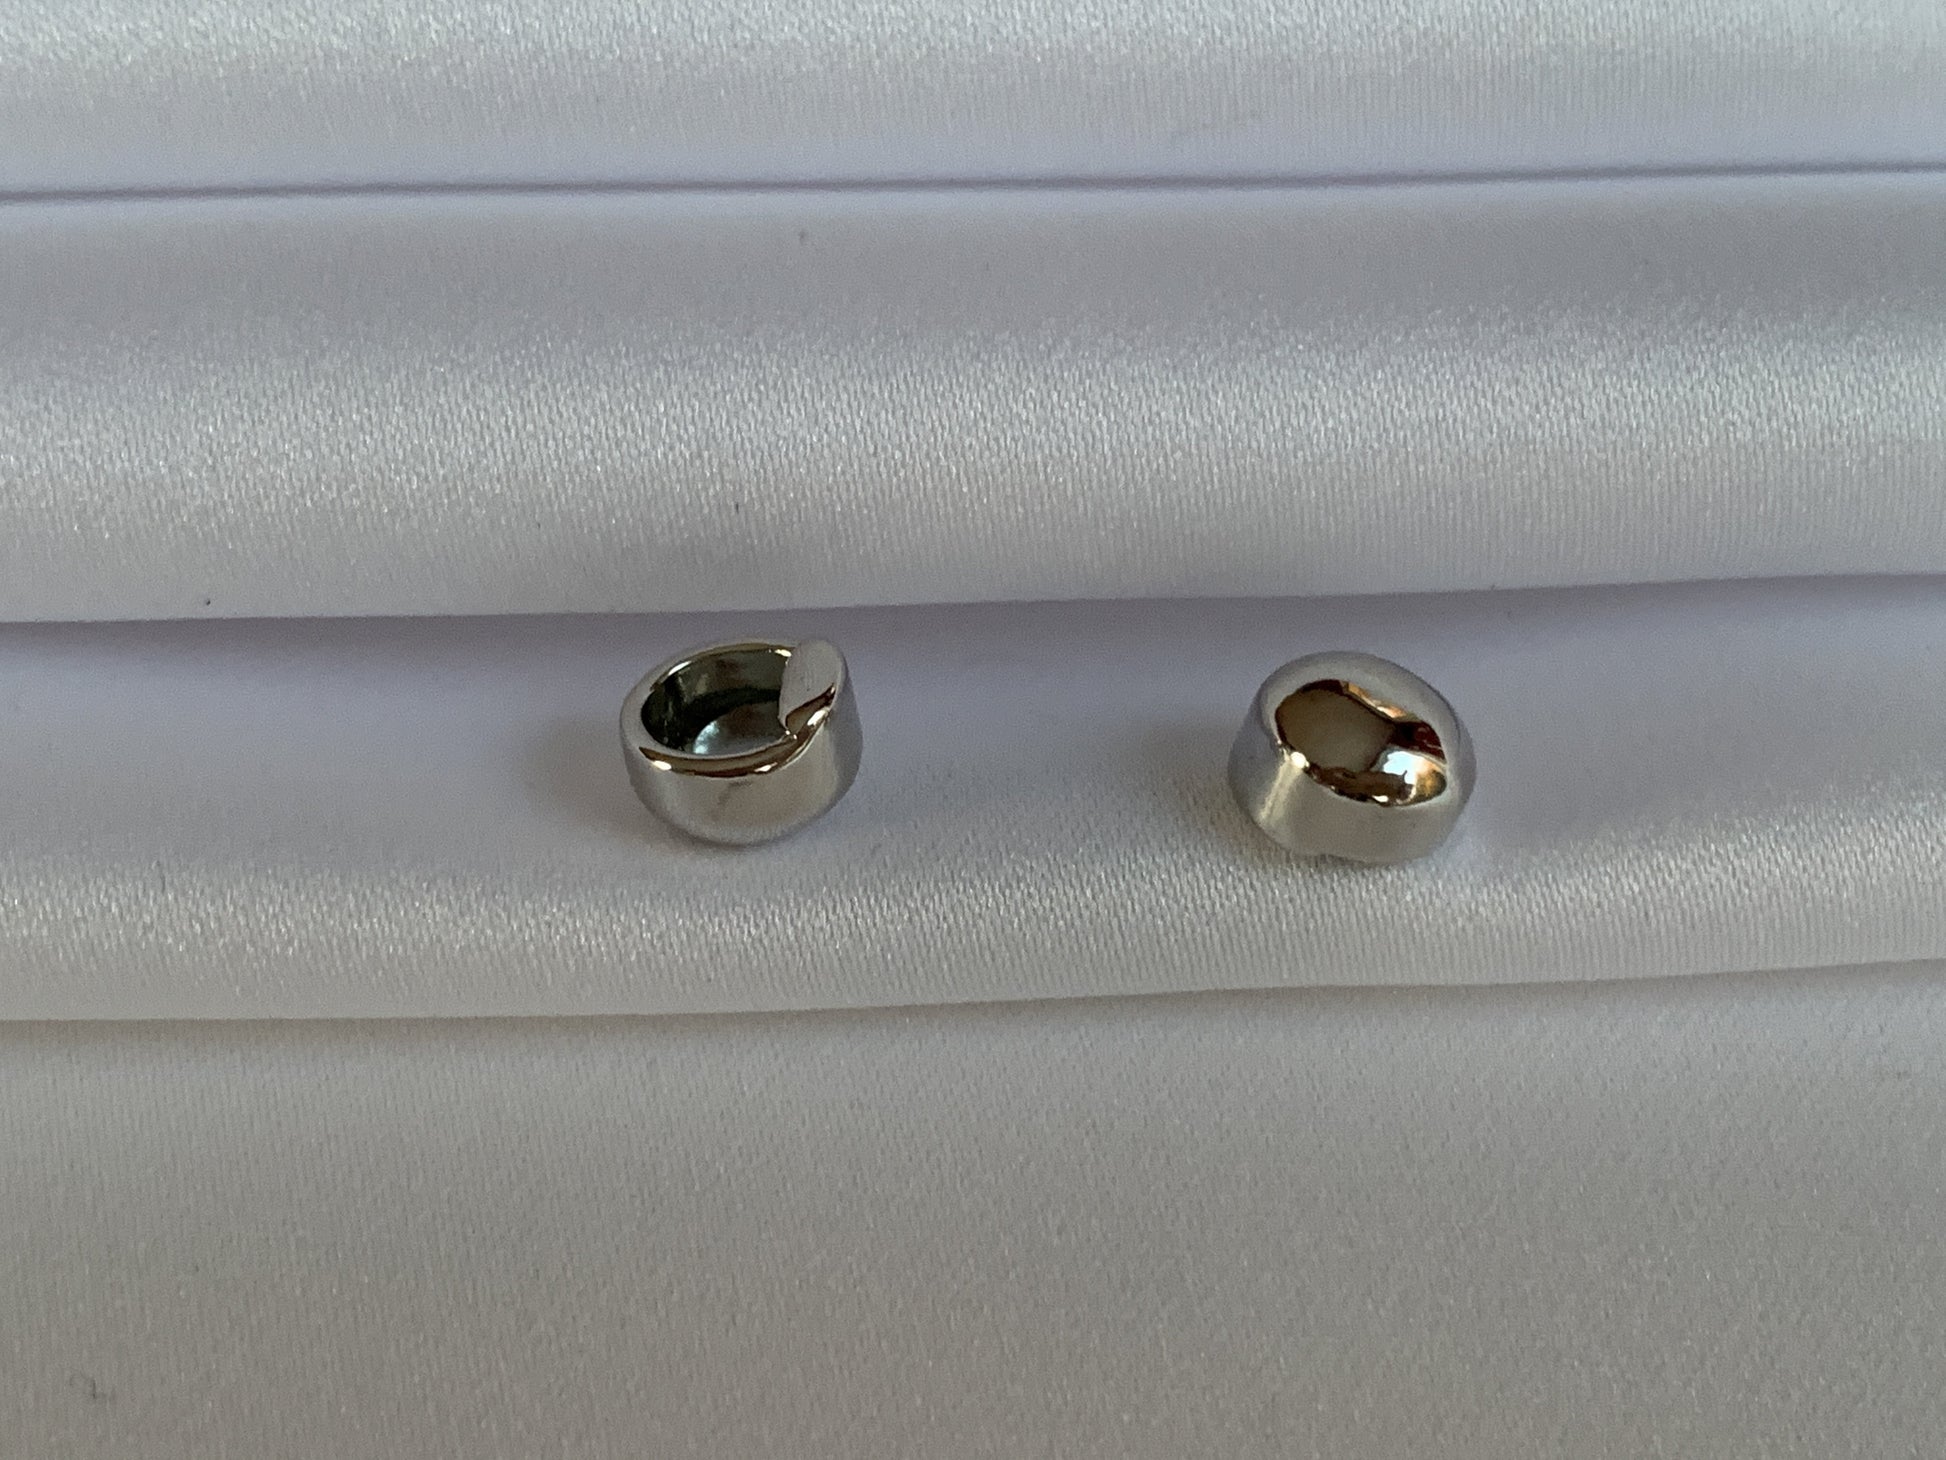 TI-GO Silver Stud Covers. Titanium Studs with titanium backs. These studs shown on a background